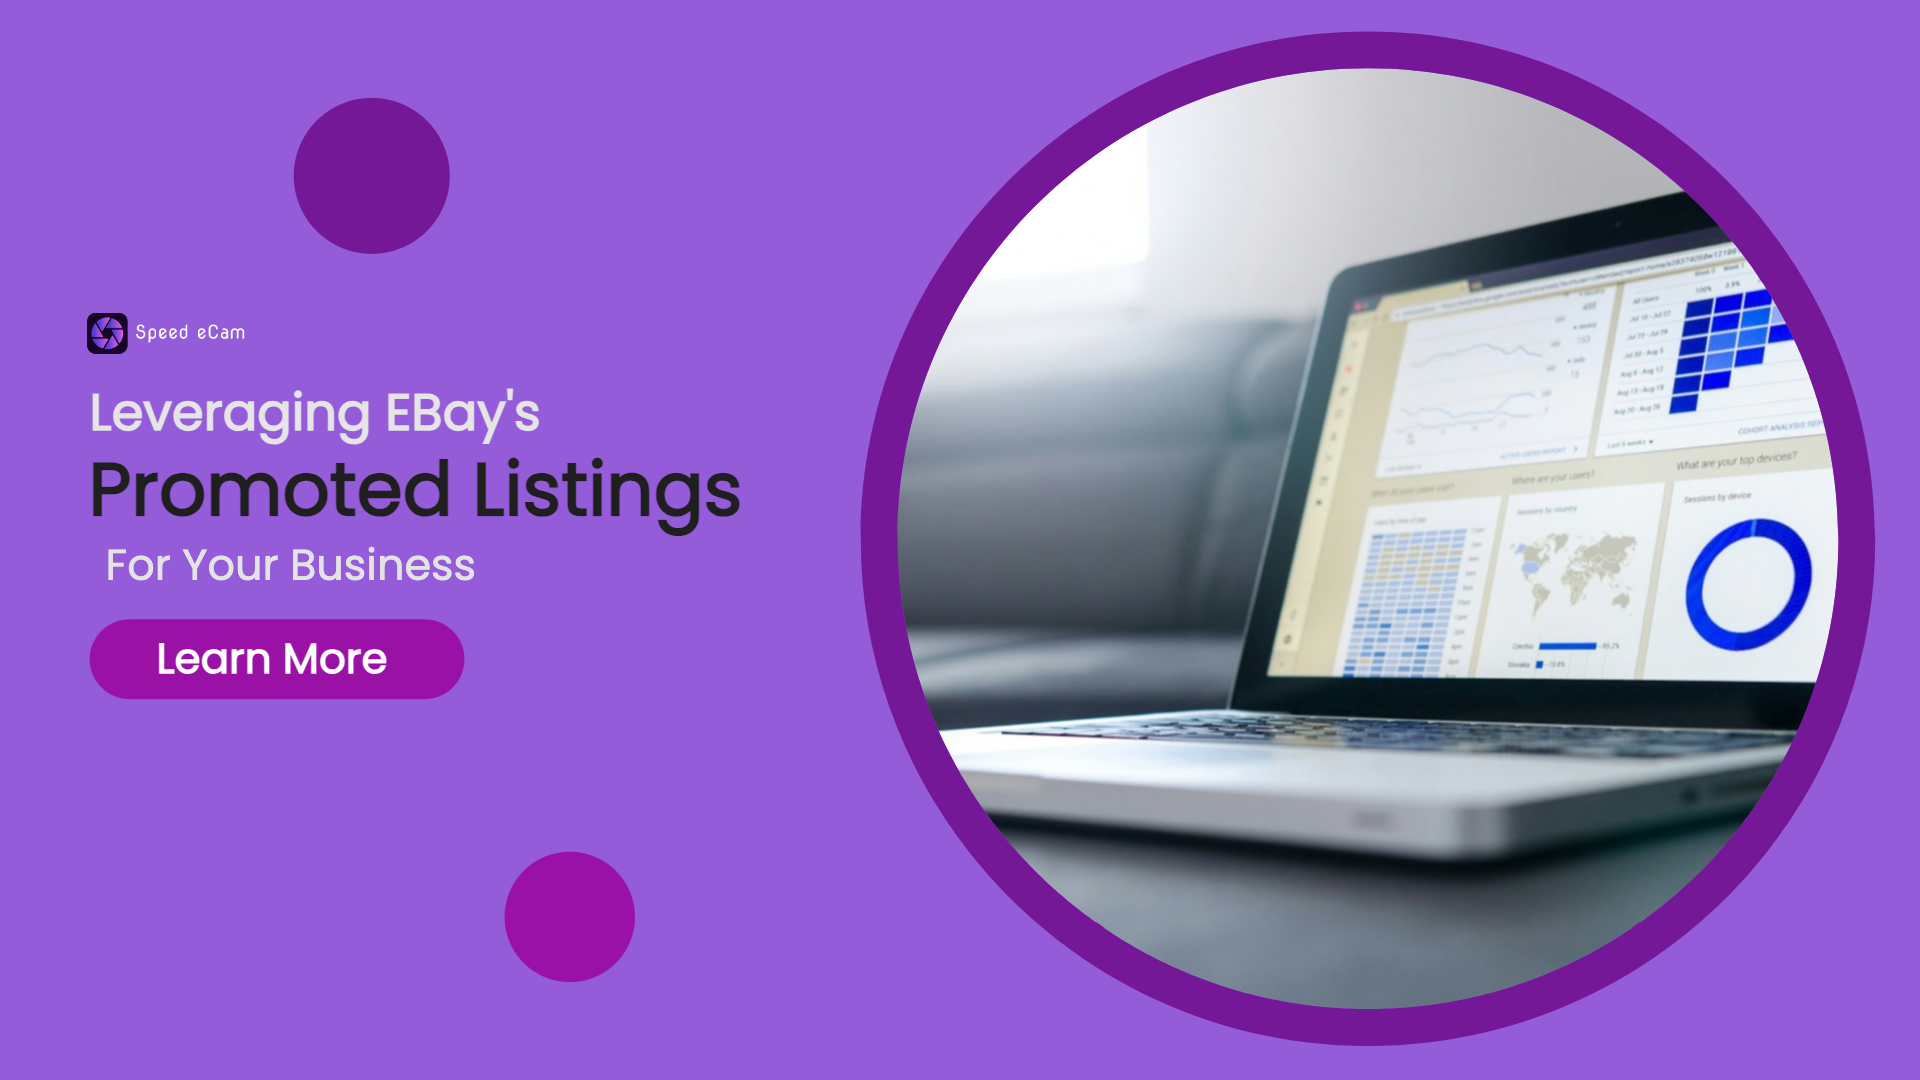 Leveraging eBay's Promoted Listings for Your Business